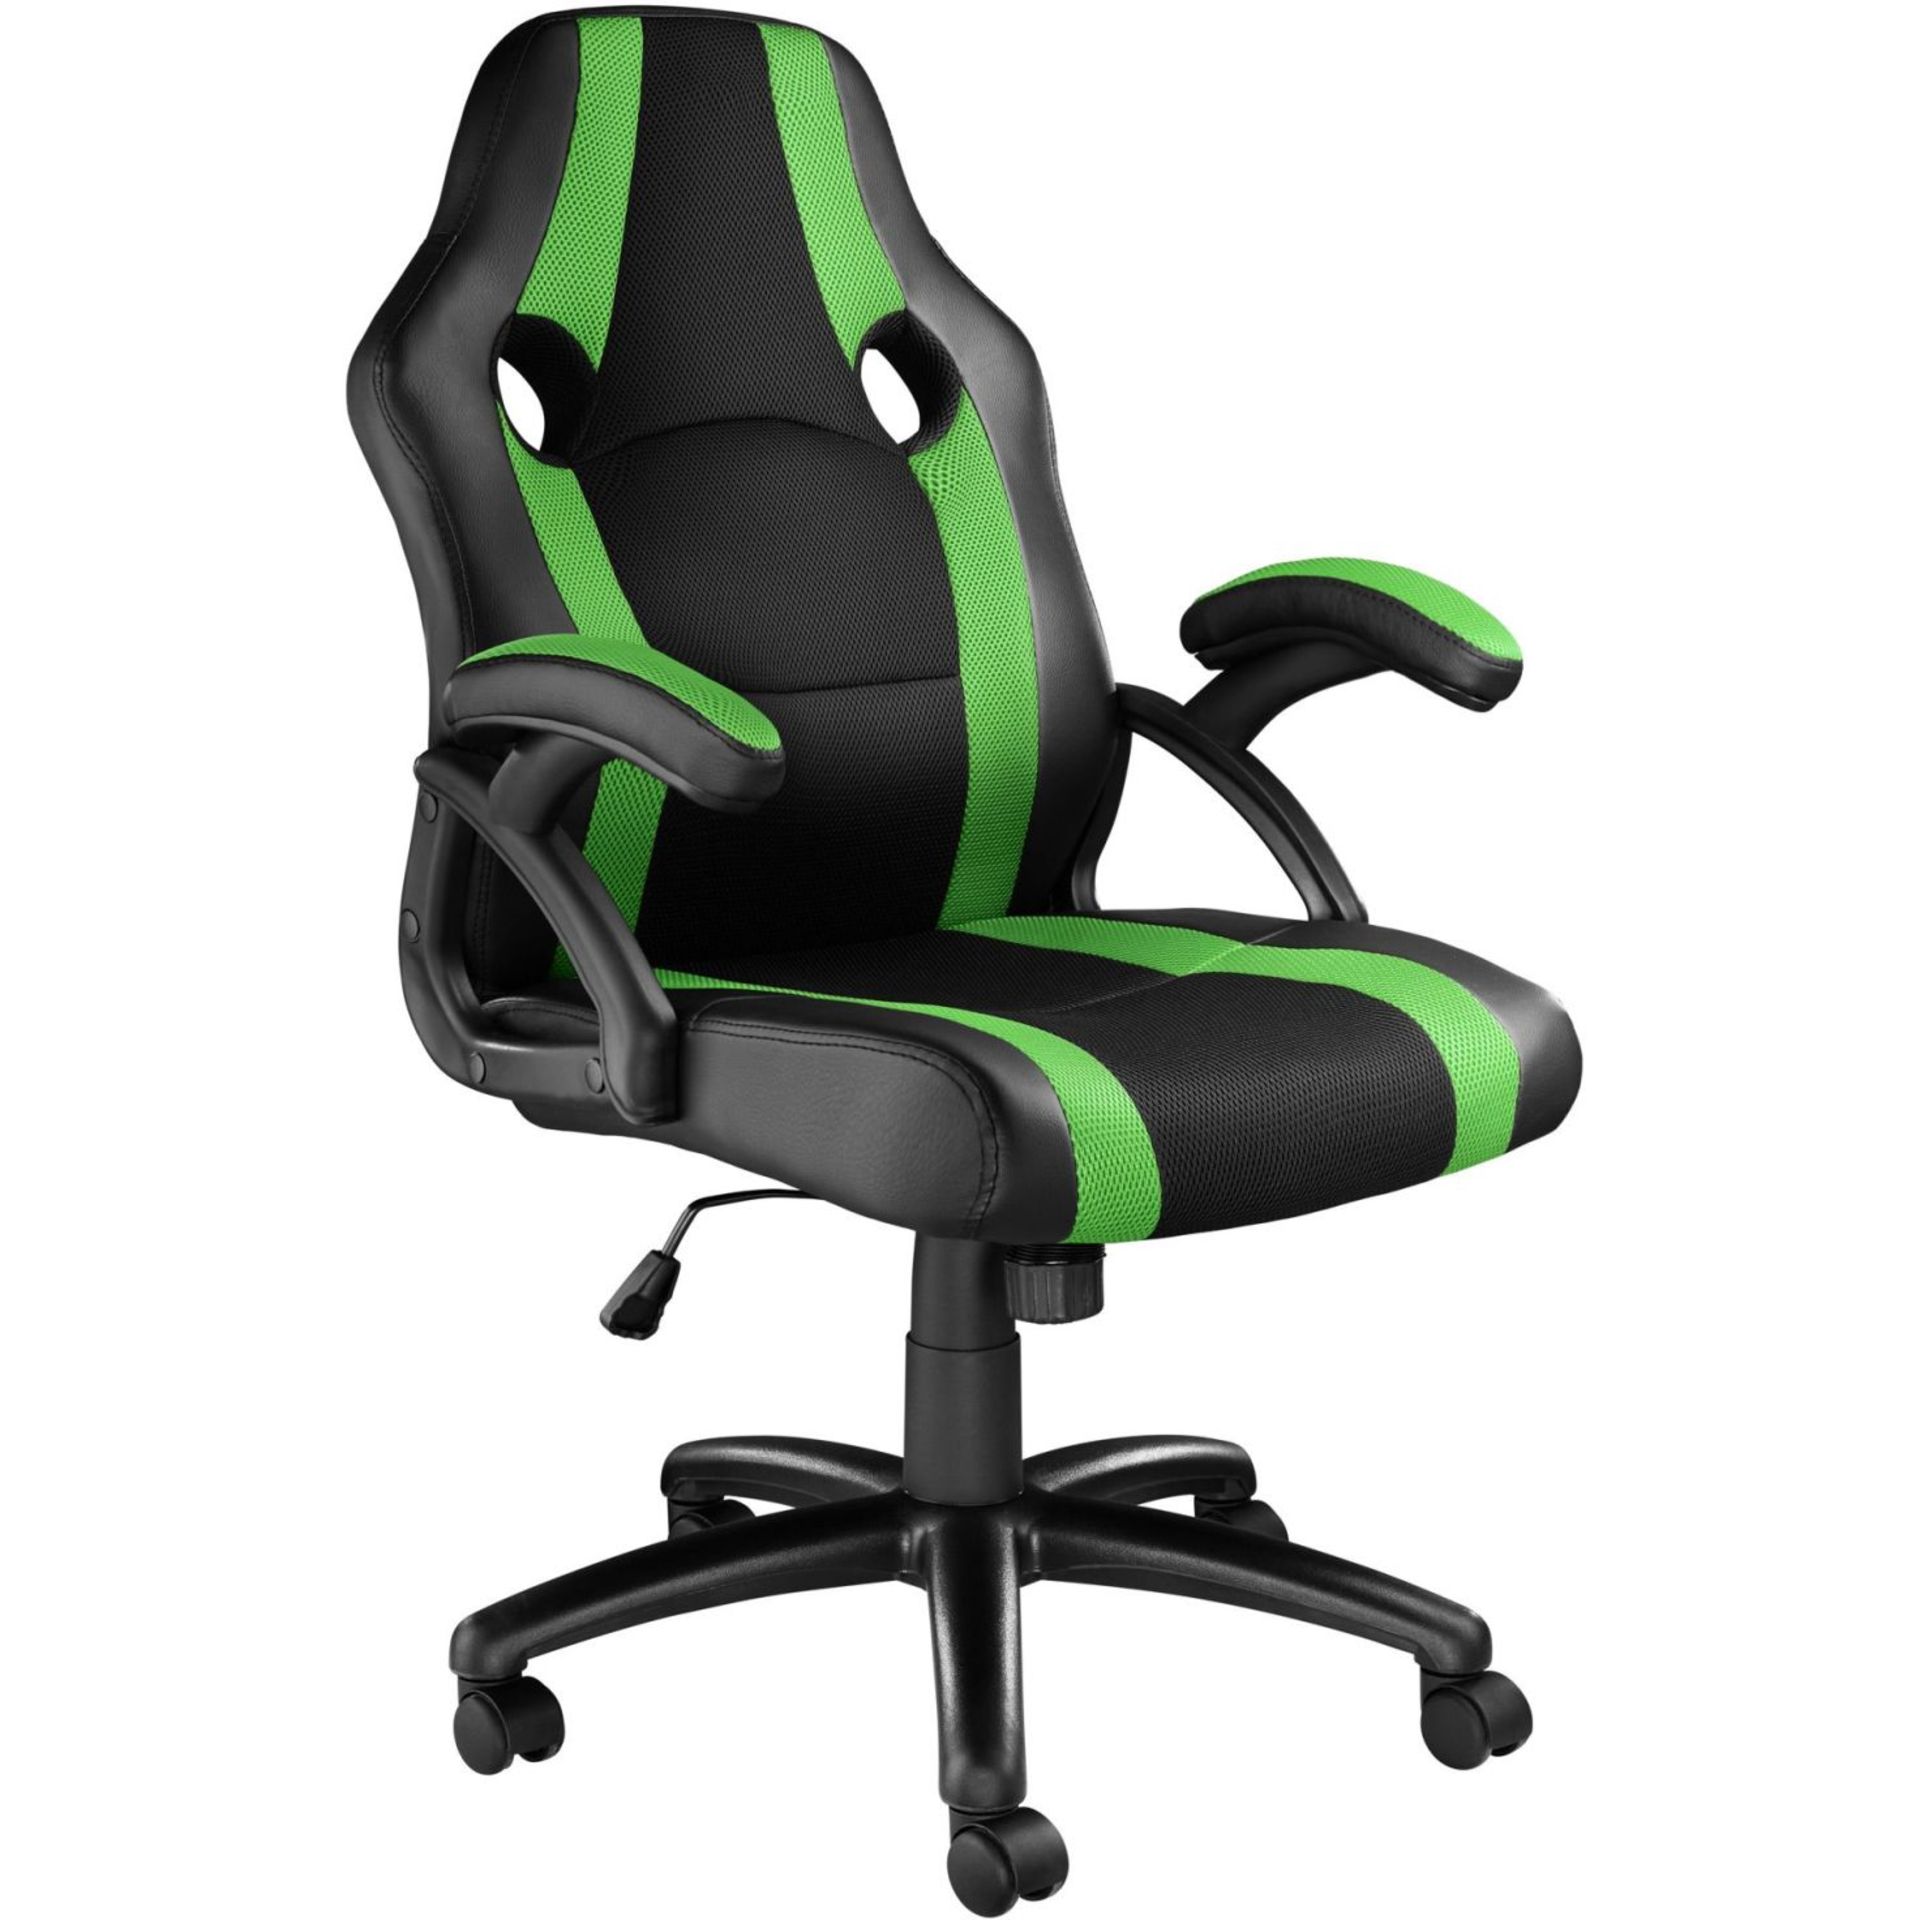 Tectake - Benny Office Chair Black And Green - Boxed. RRP £72.99 - Image 2 of 2